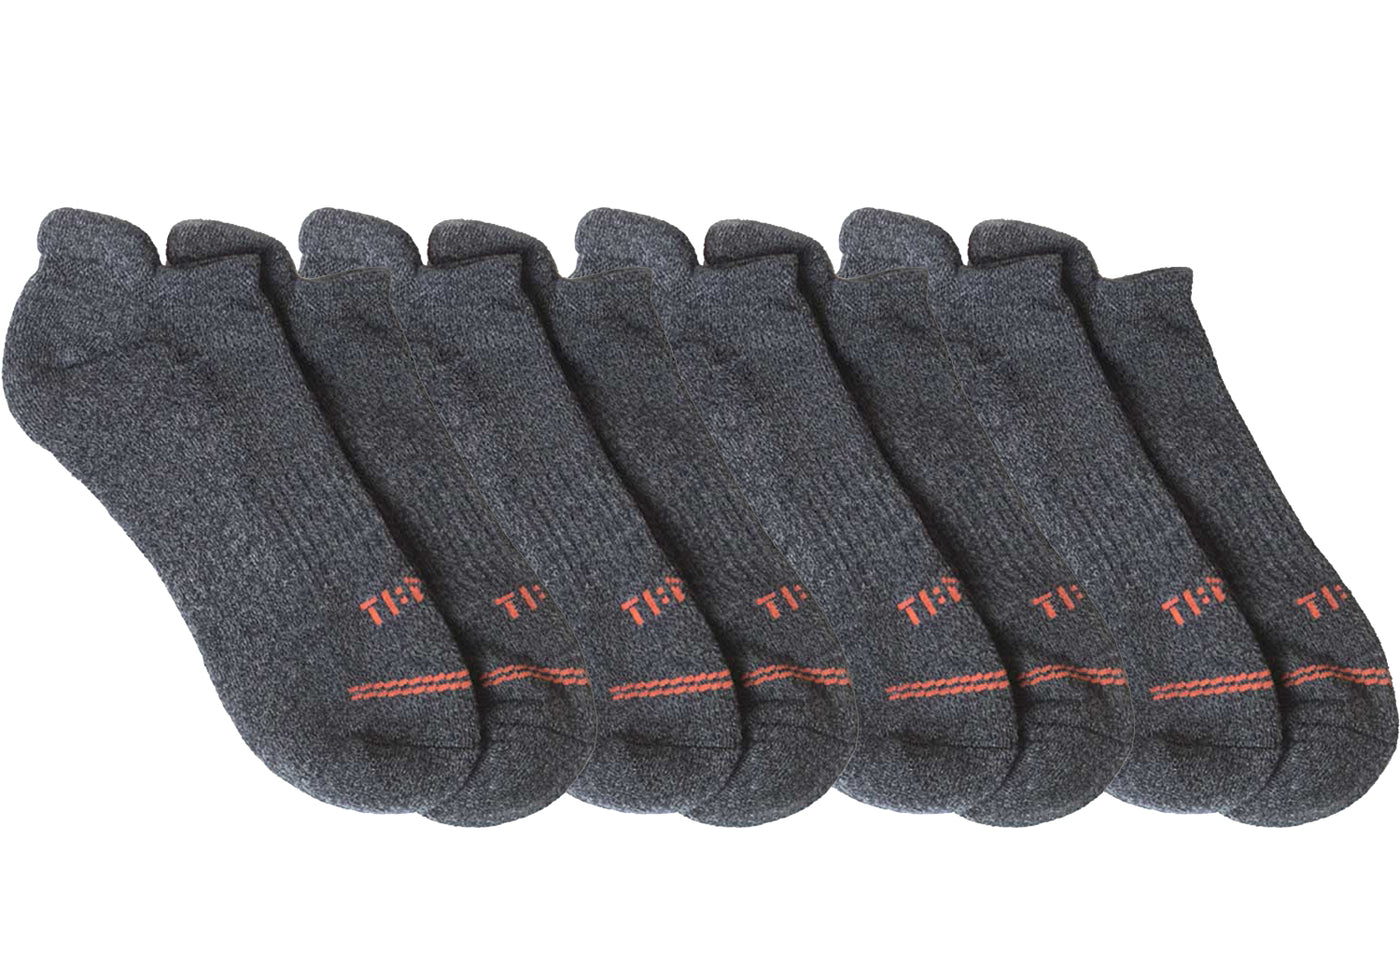 TIME Comfort Socks (unisex) - Ankle Socks - 4 Pack / Small by TIME Slippers